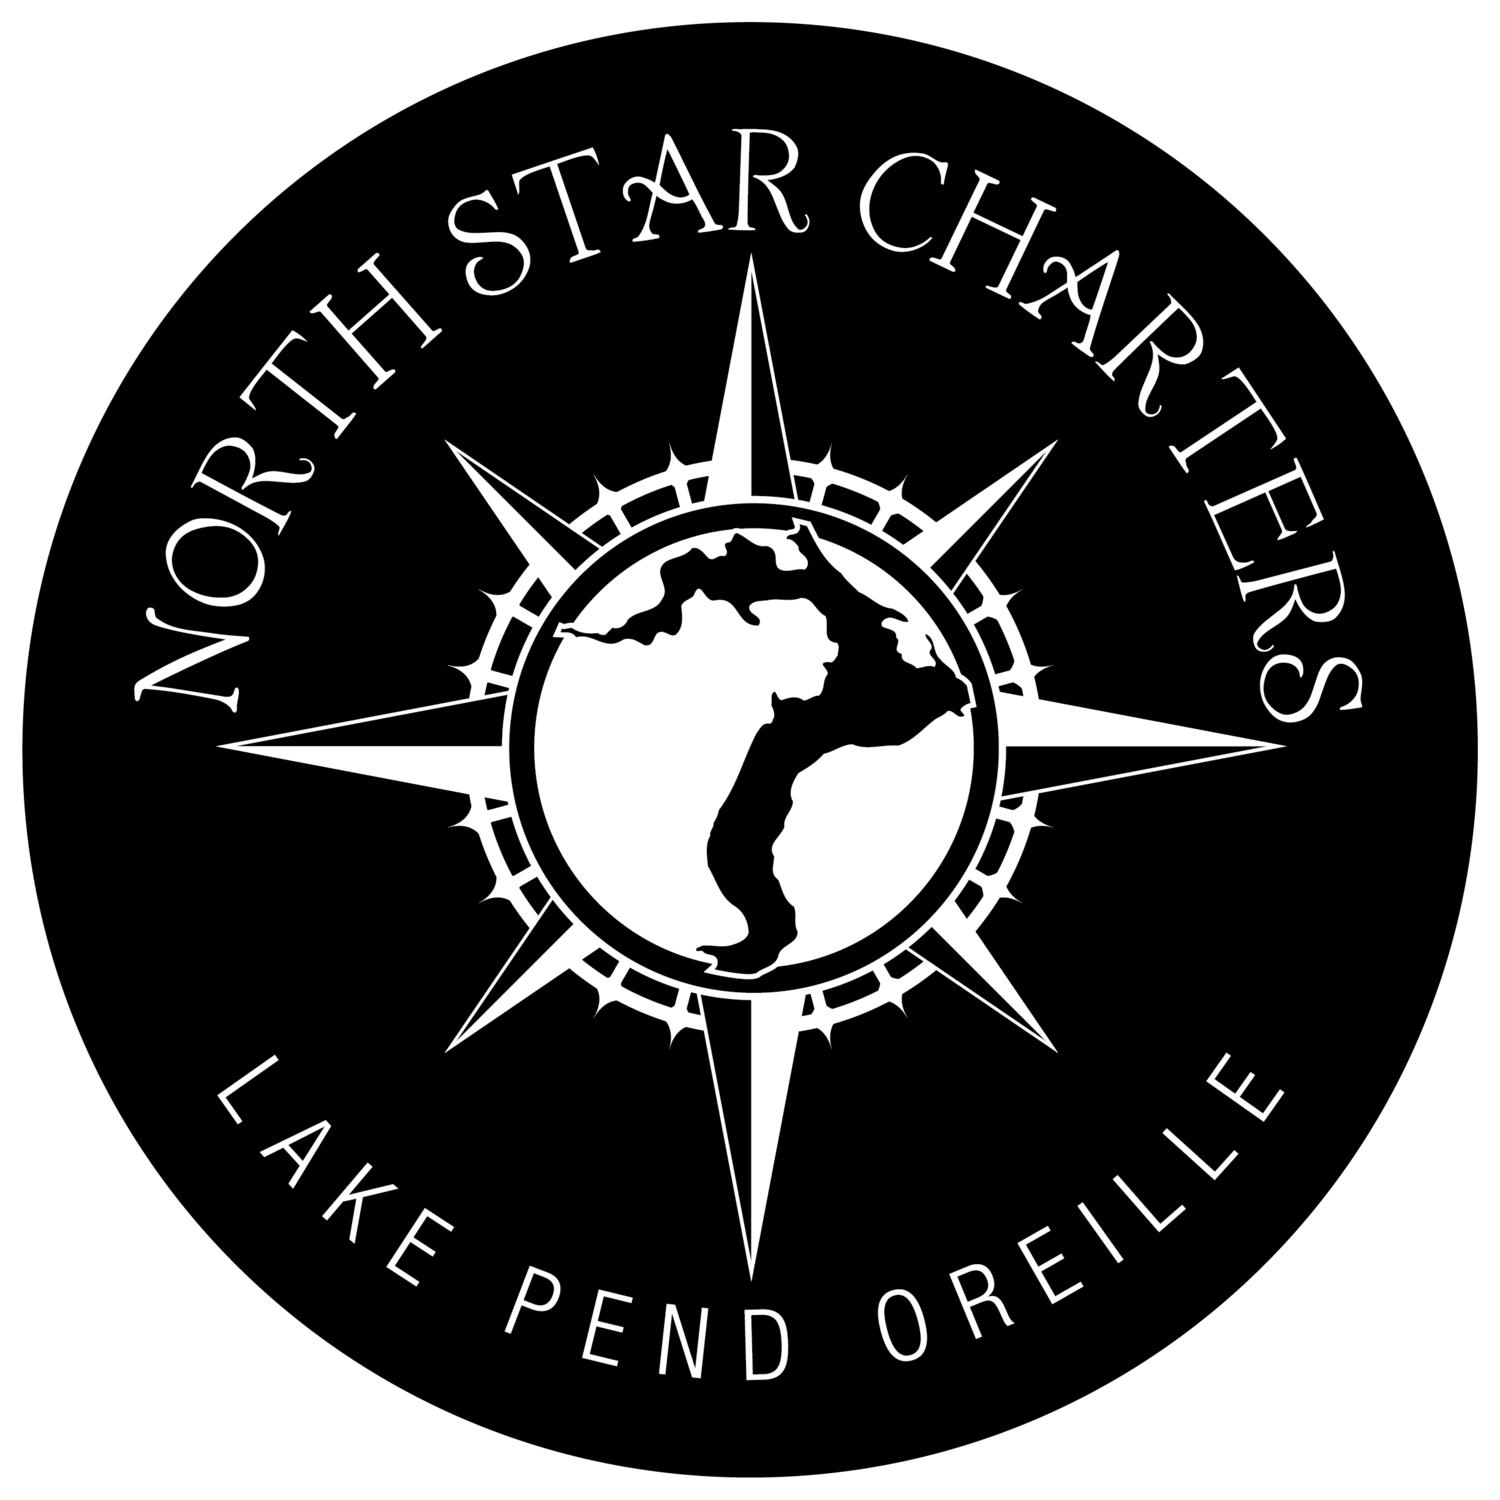 The North Star Charters 